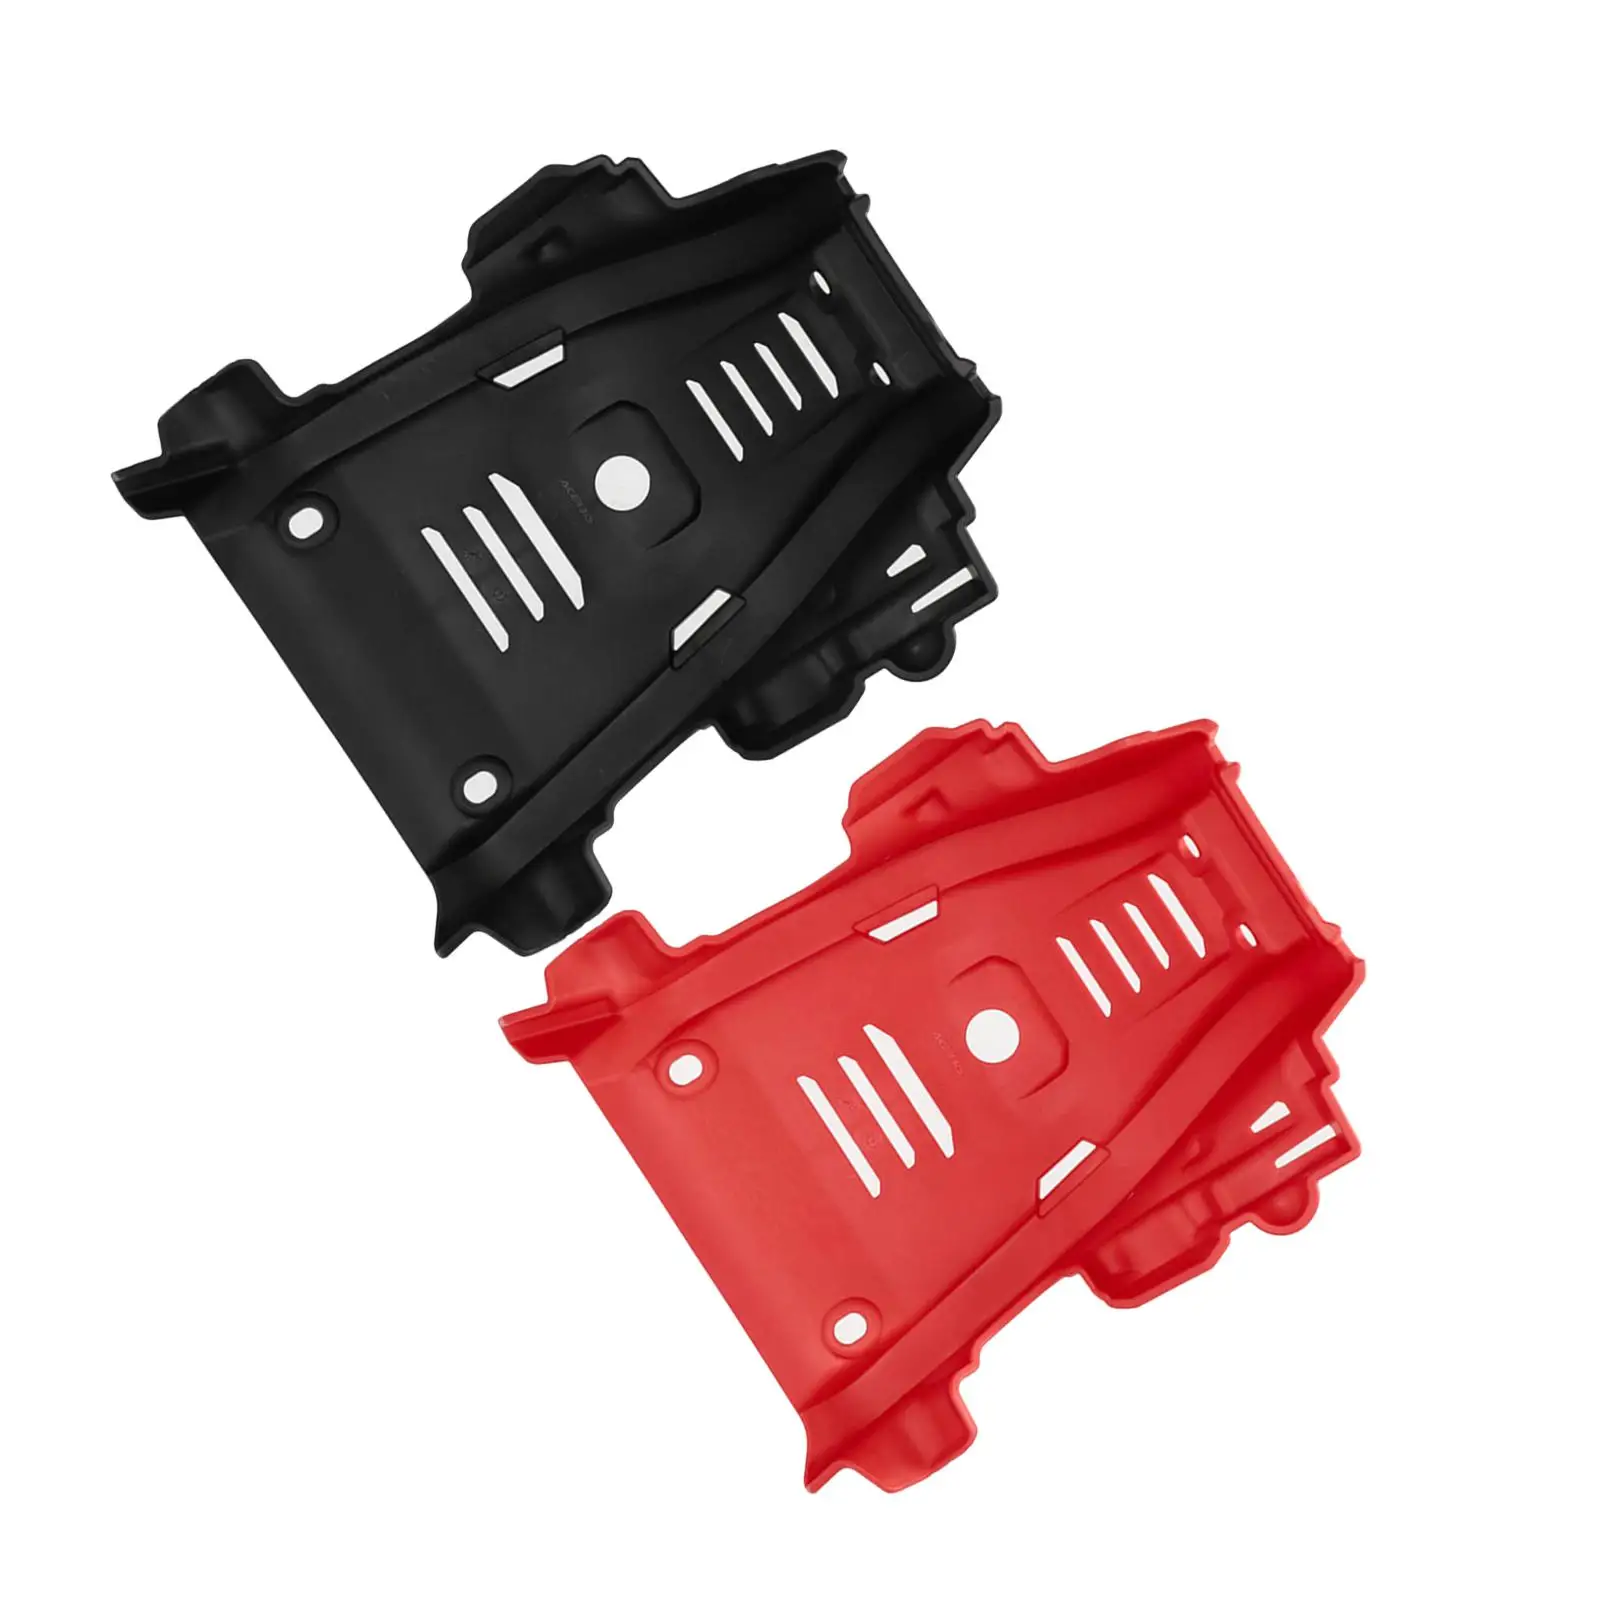 Engine Chassis Guard Plate Protection Cover for Crf300L Supplies Easy to Install